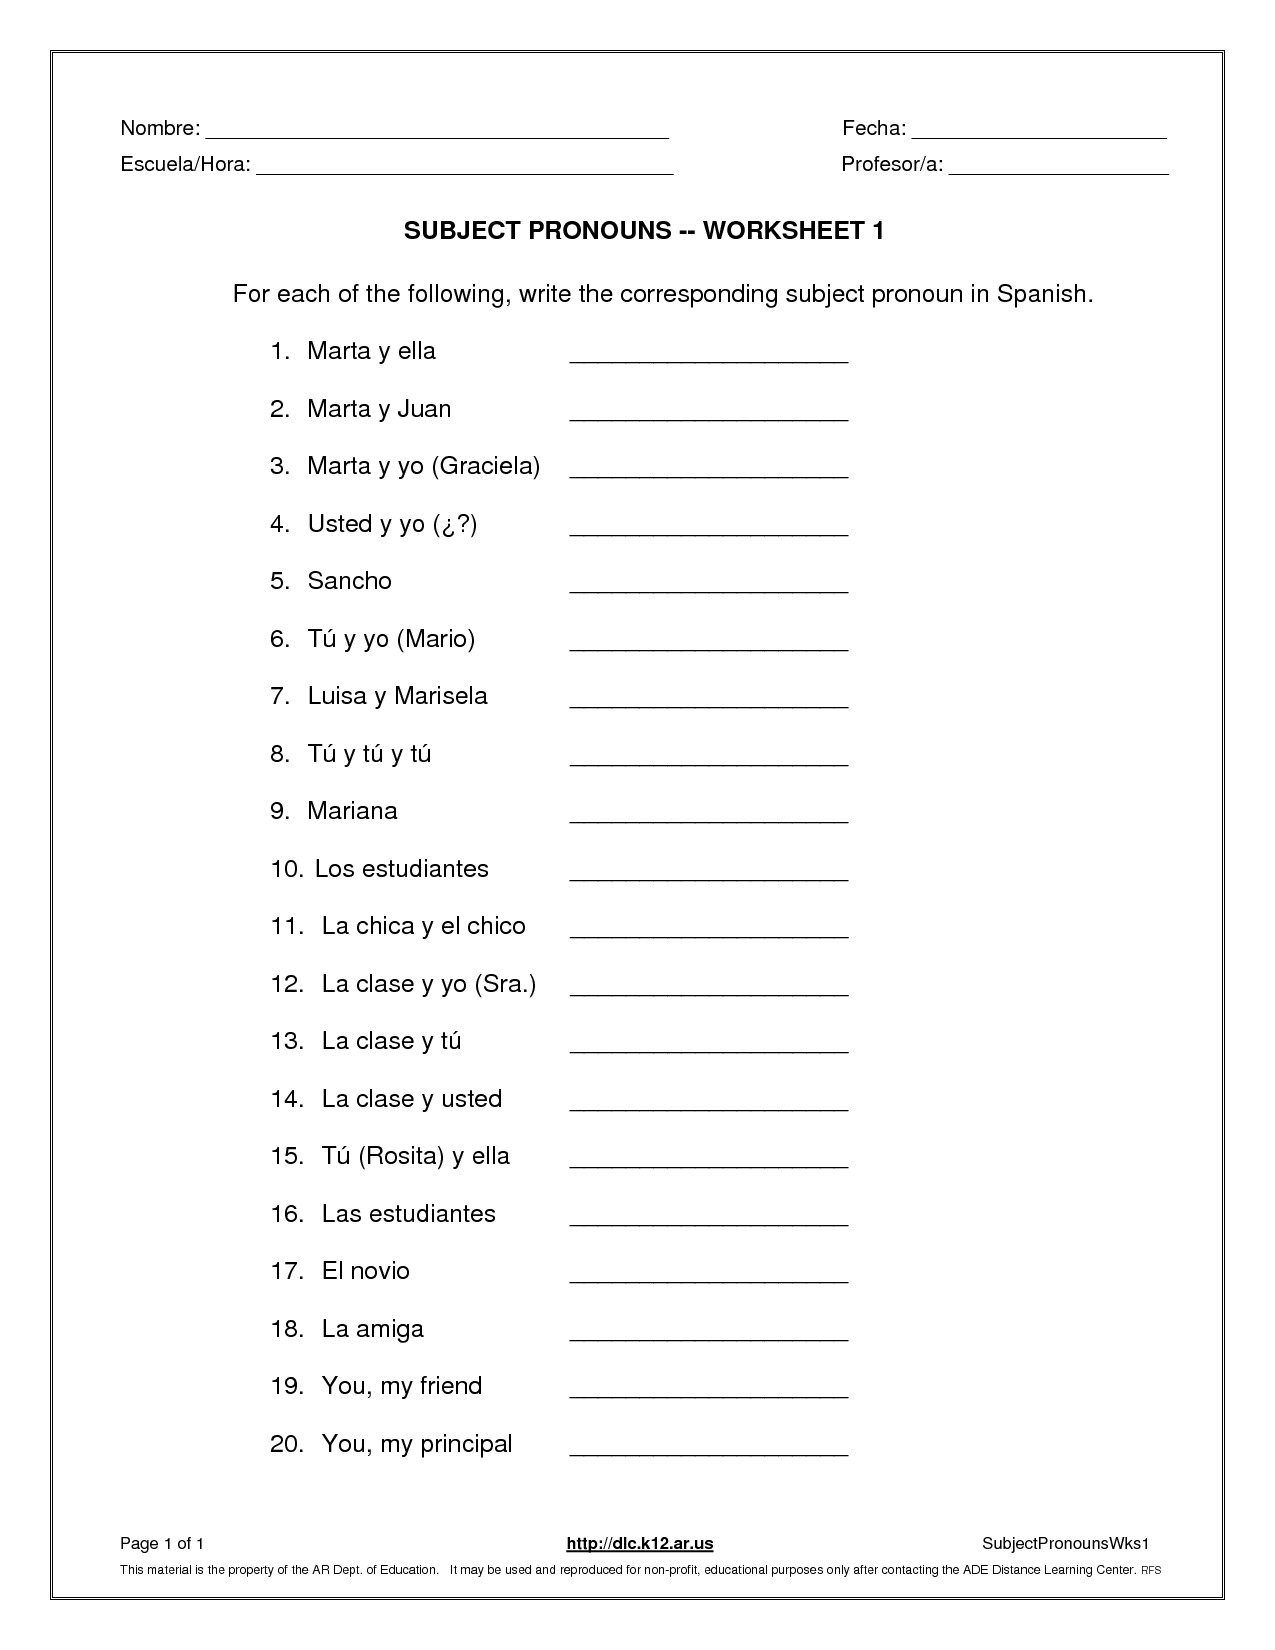 identify-object-pronouns-in-a-sentence-turtle-diary-worksheet